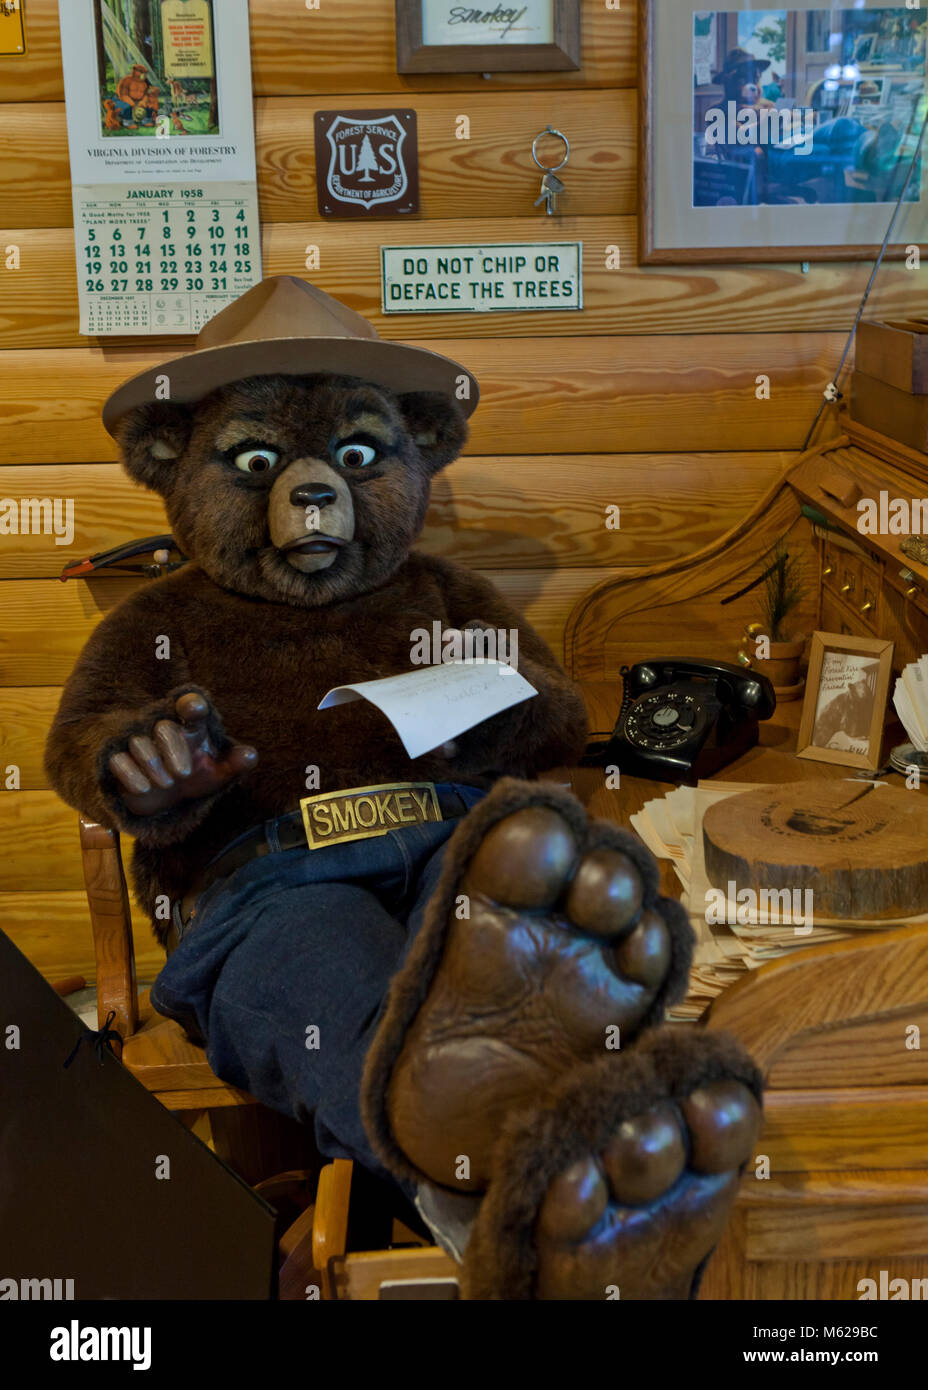 Smokey the bear animatronic sitting in office at the US Forest Service headquarters - Washington, DC USA Stock Photo